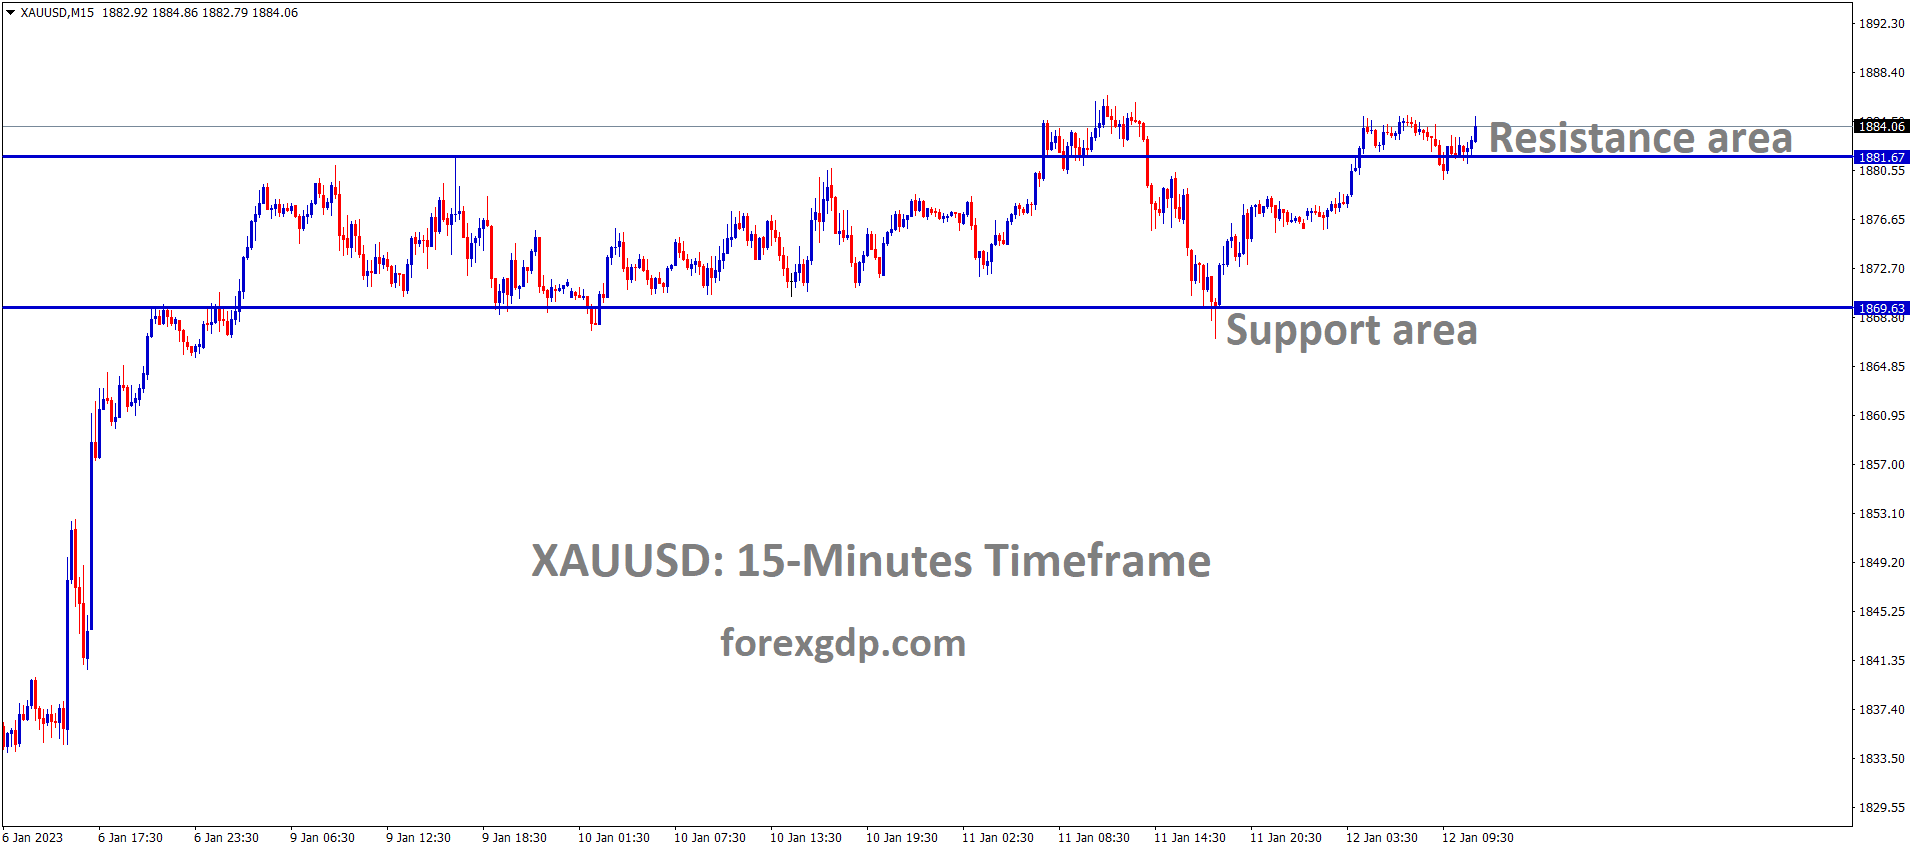 XAUUSD Gold price is moving in the Box pattern and the market has reached the resistance area of the pattern